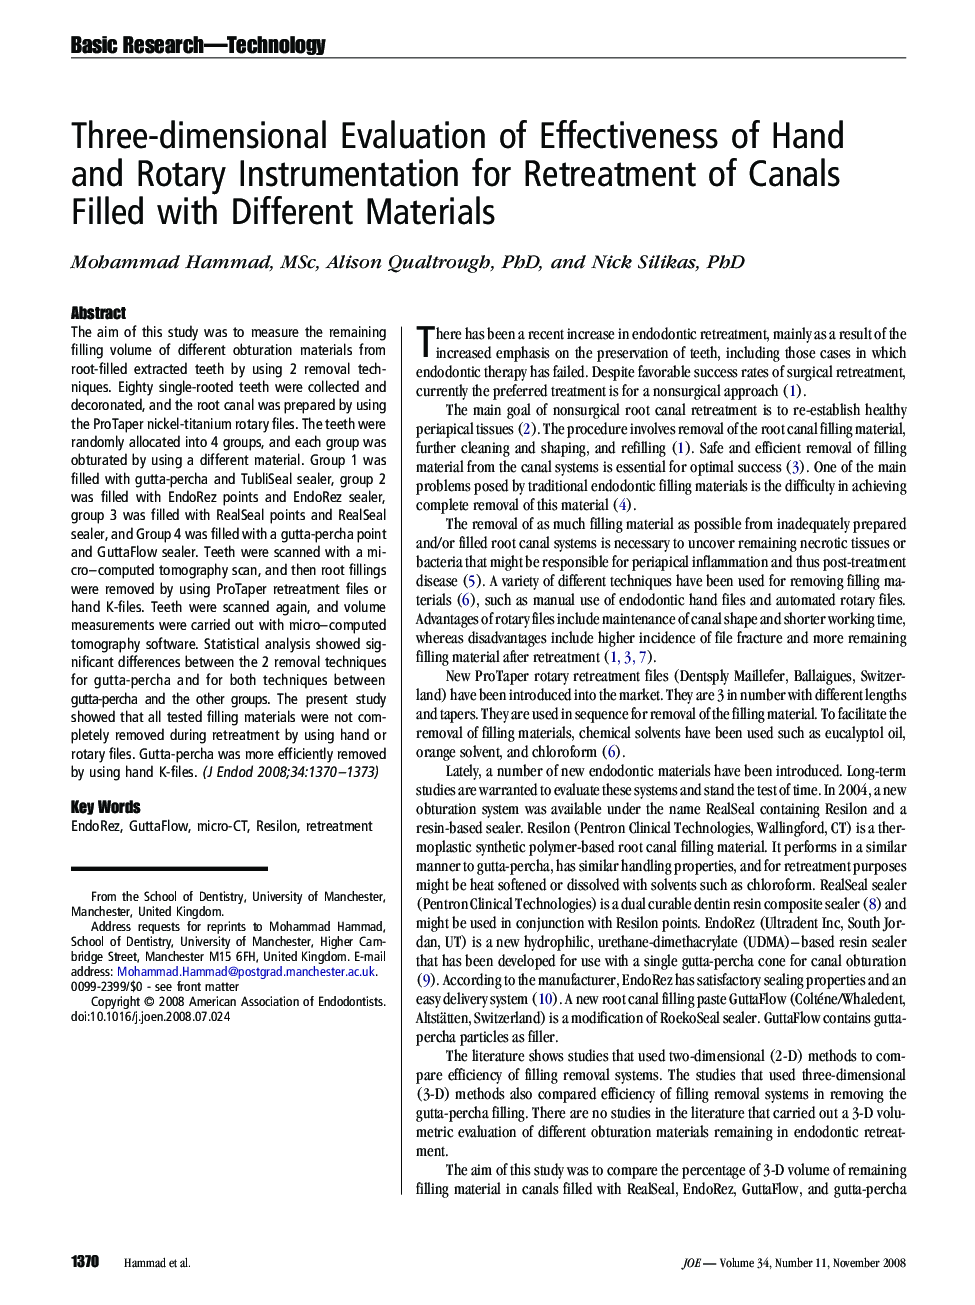 Three-dimensional Evaluation of Effectiveness of Hand and Rotary Instrumentation for Retreatment of Canals Filled with Different Materials